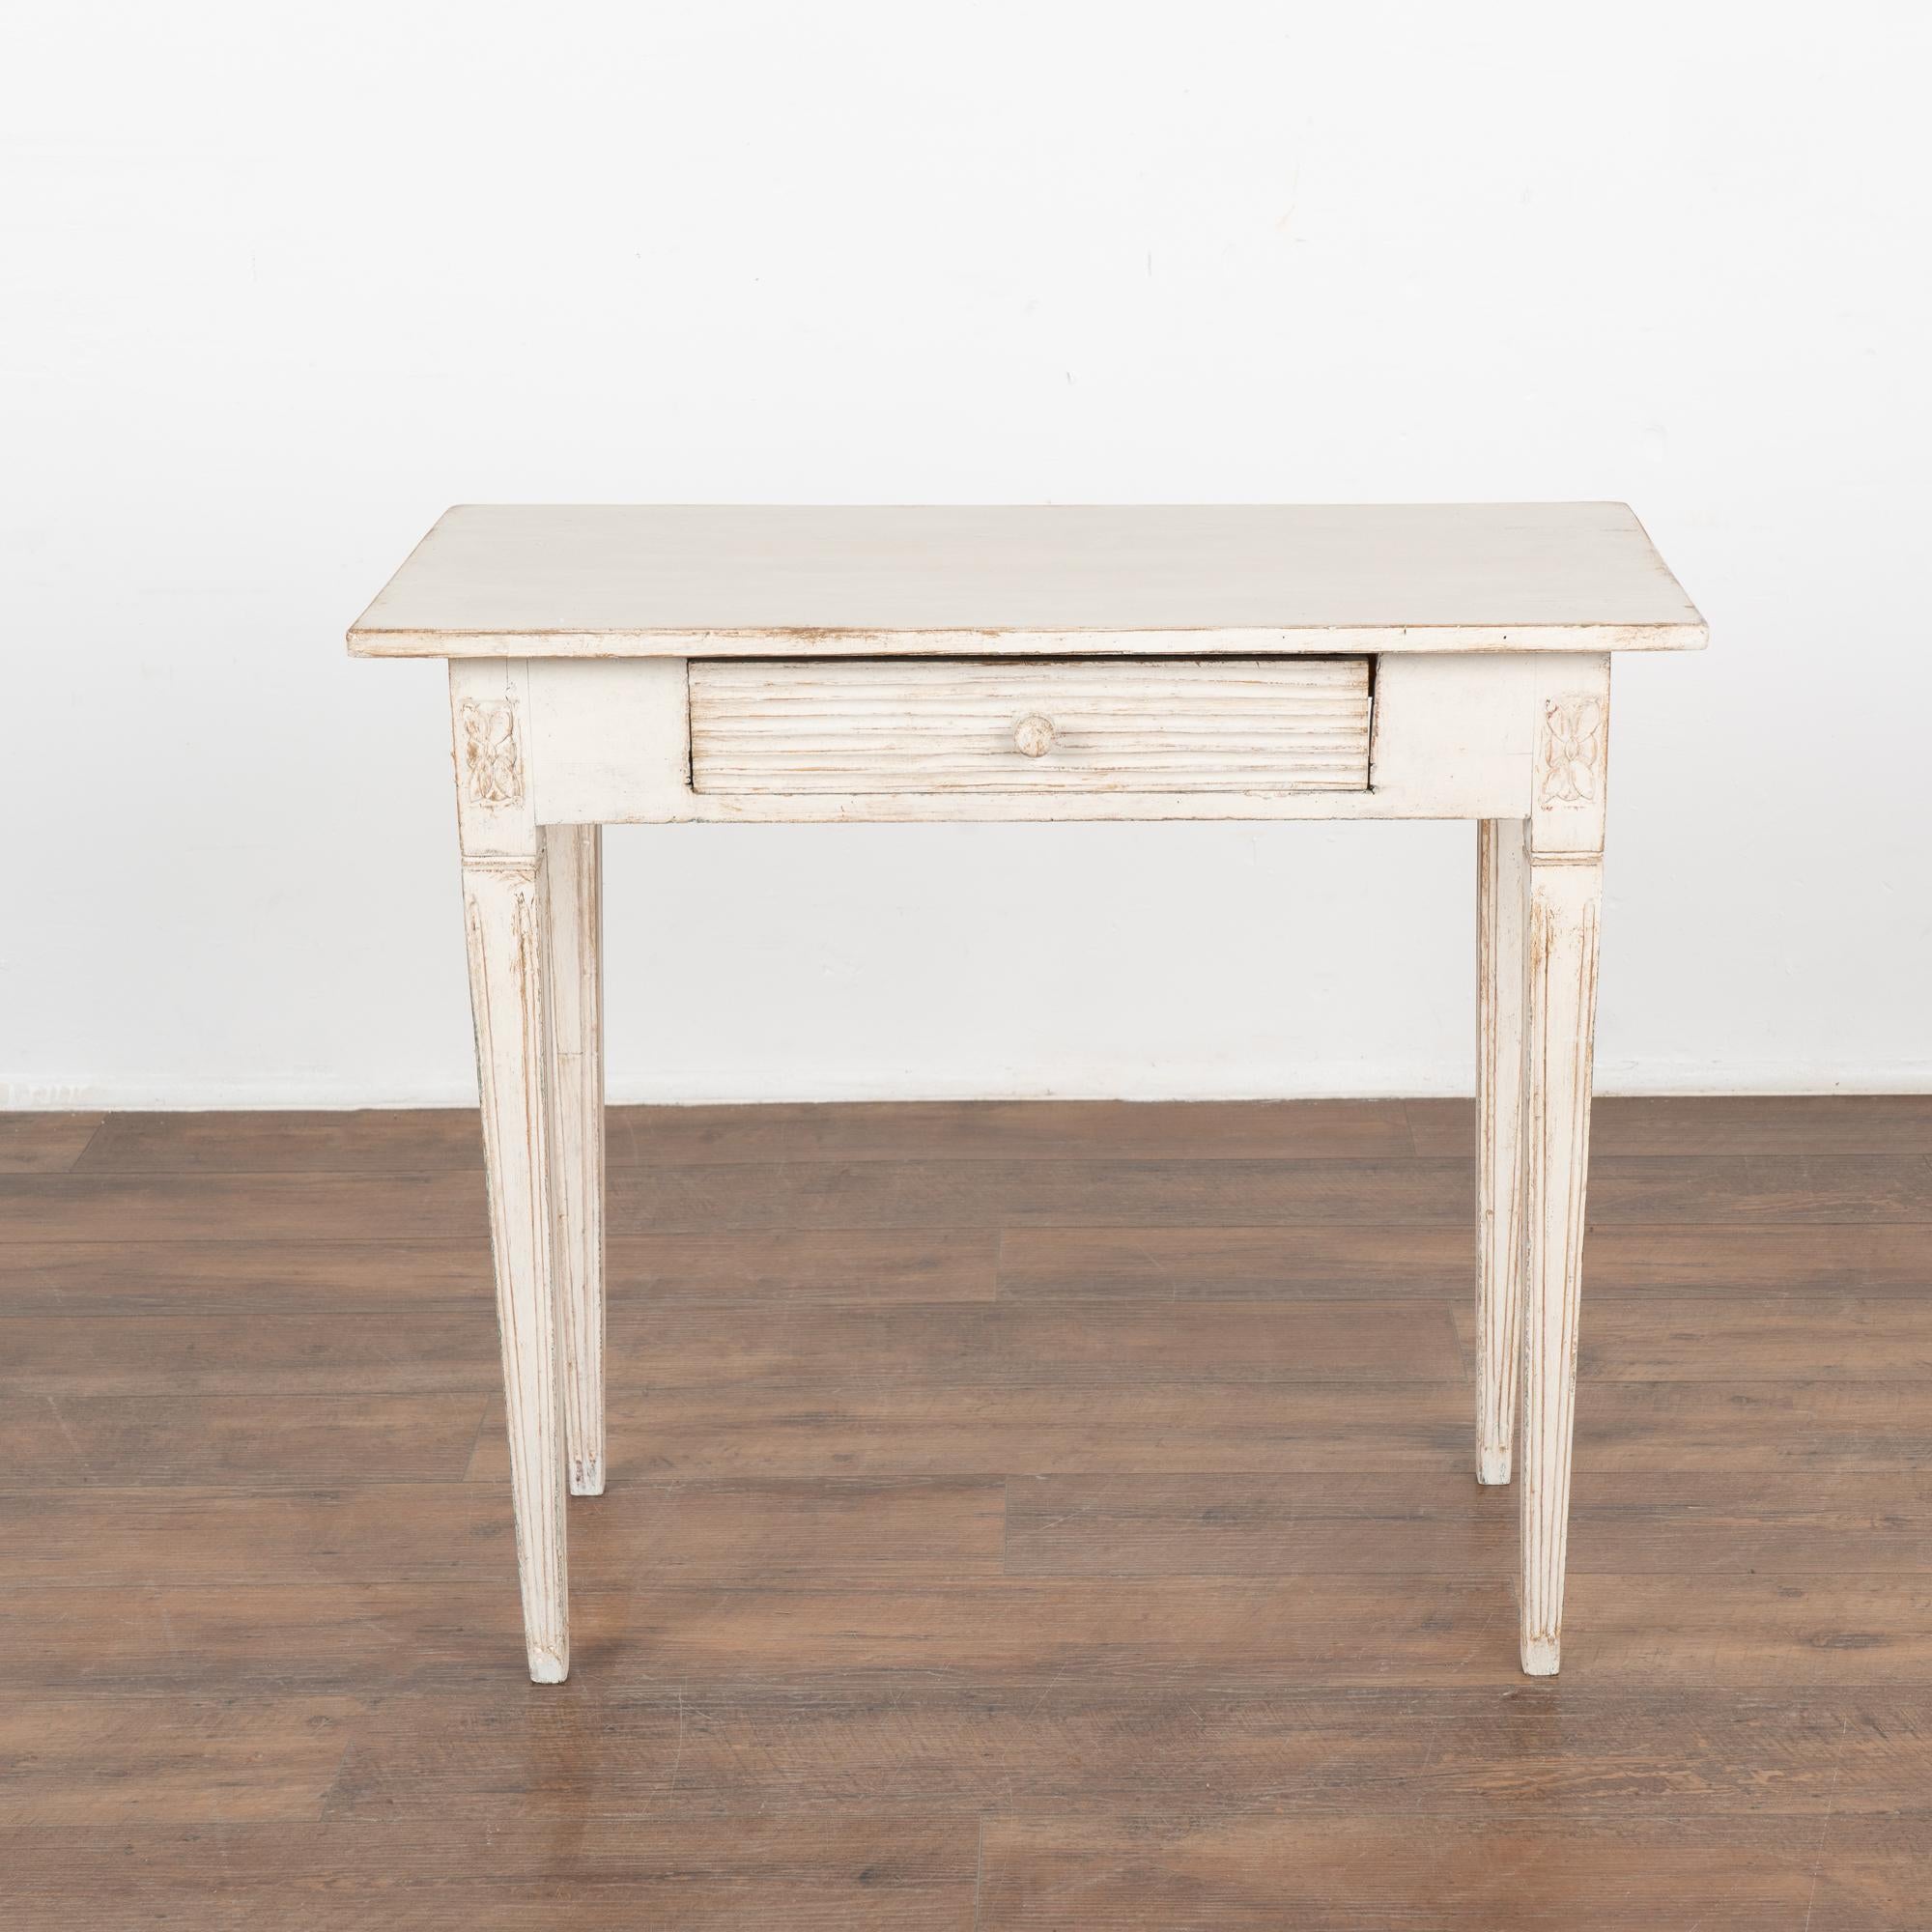 Swedish White Painted Side Table With Single Drawer, Sweden circa 1860-80 For Sale